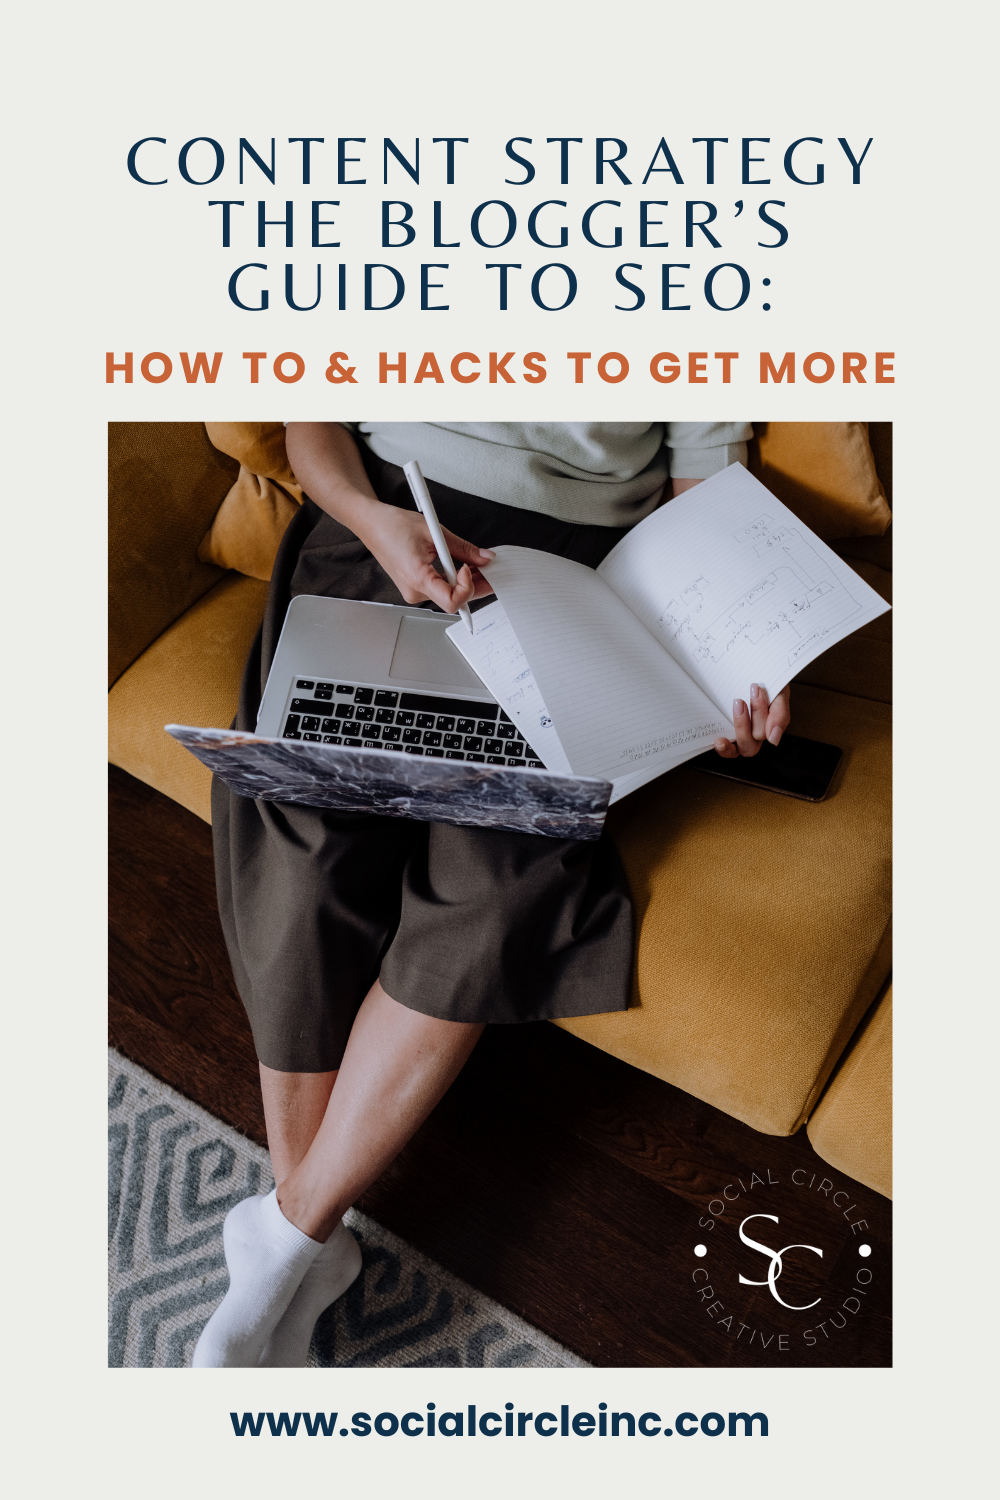 The Blogger Guide to SEO